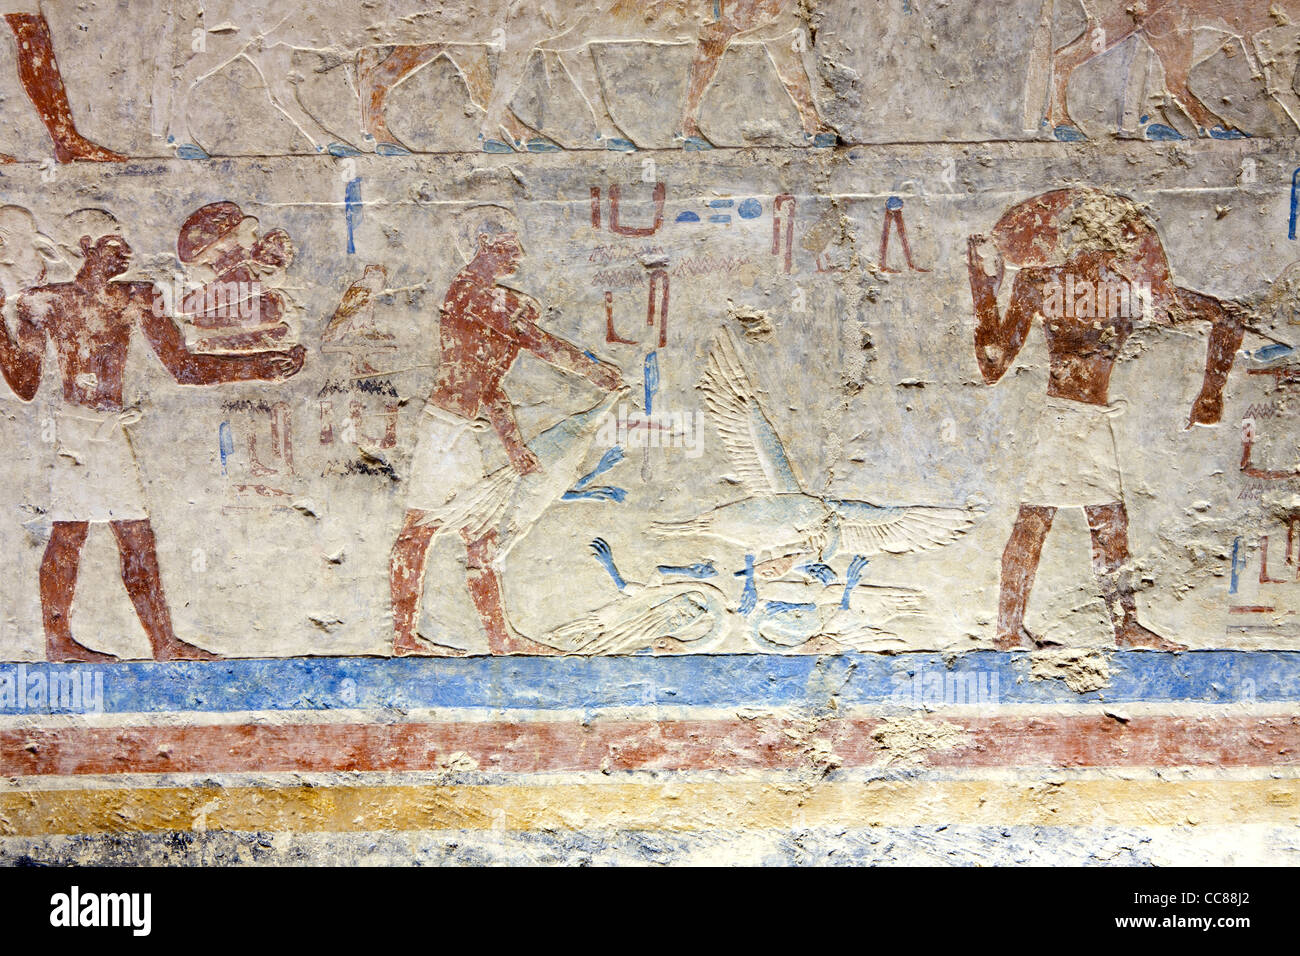 Reliefs in the Middle Kingdom tomb of Senbi Son of Ykh Hotep at Meir , North West of Asyut in Middle Egypt Stock Photo